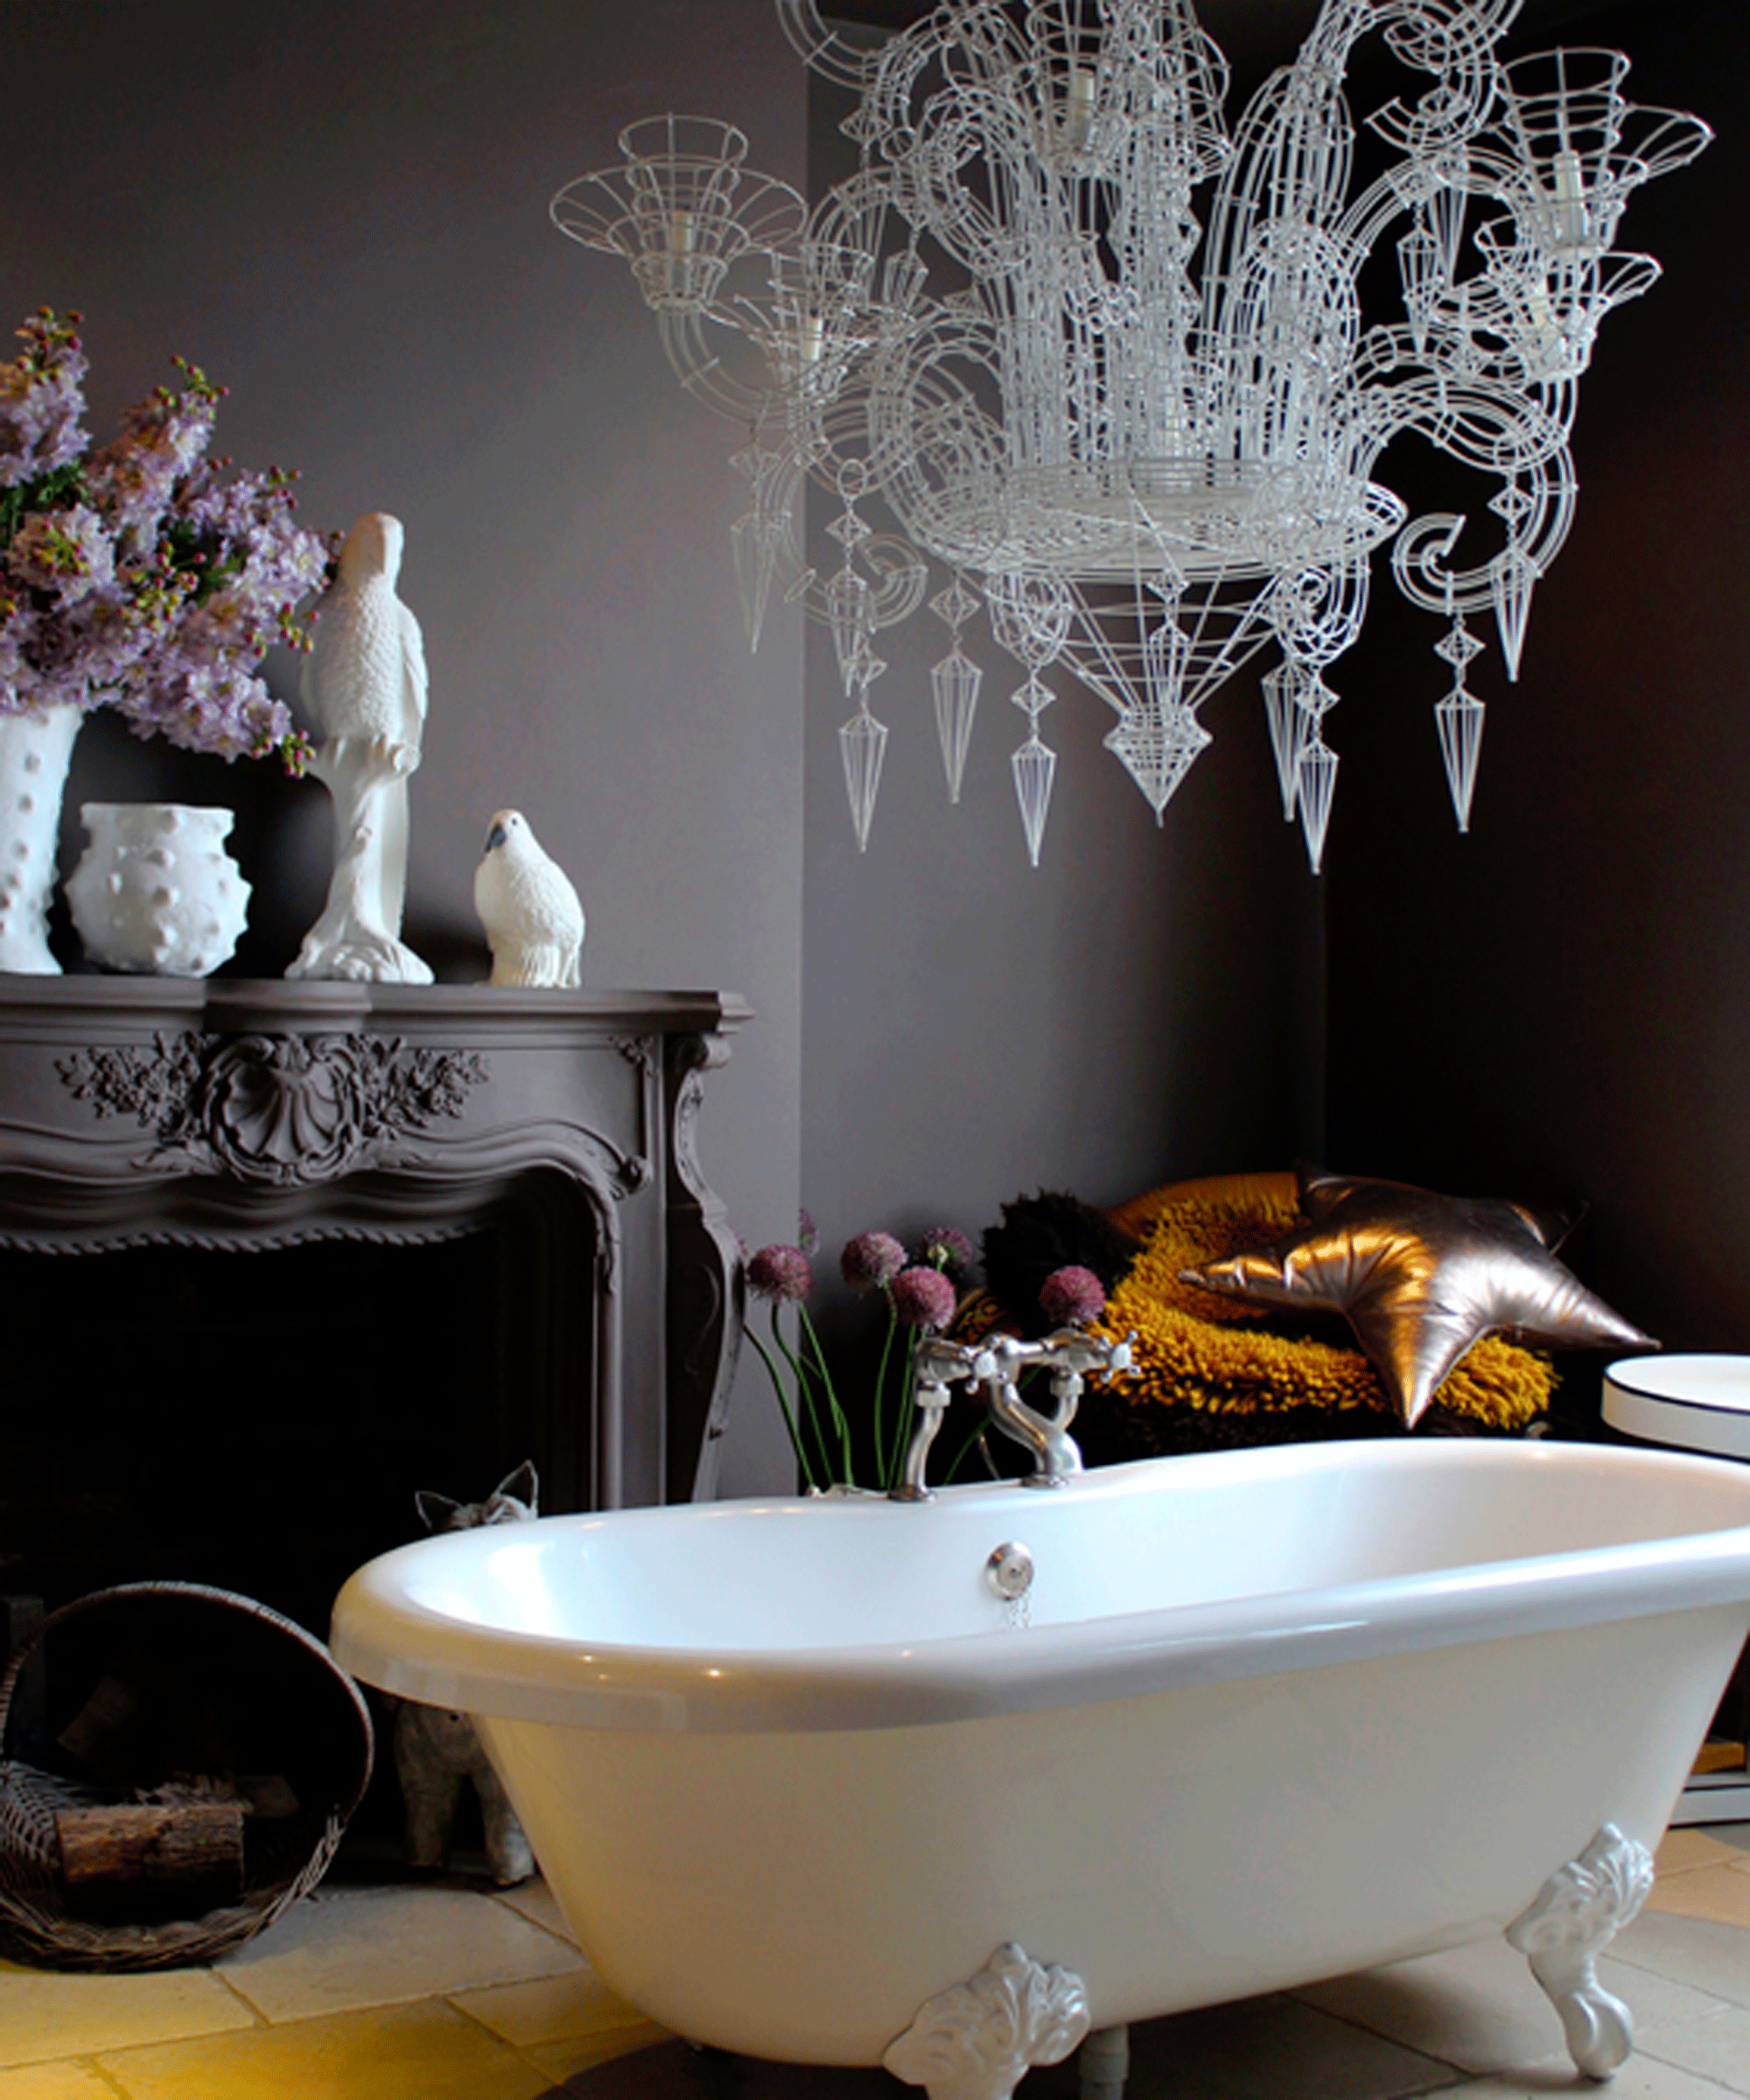 Bathroom with dark walls and freestanding bath and chandelier